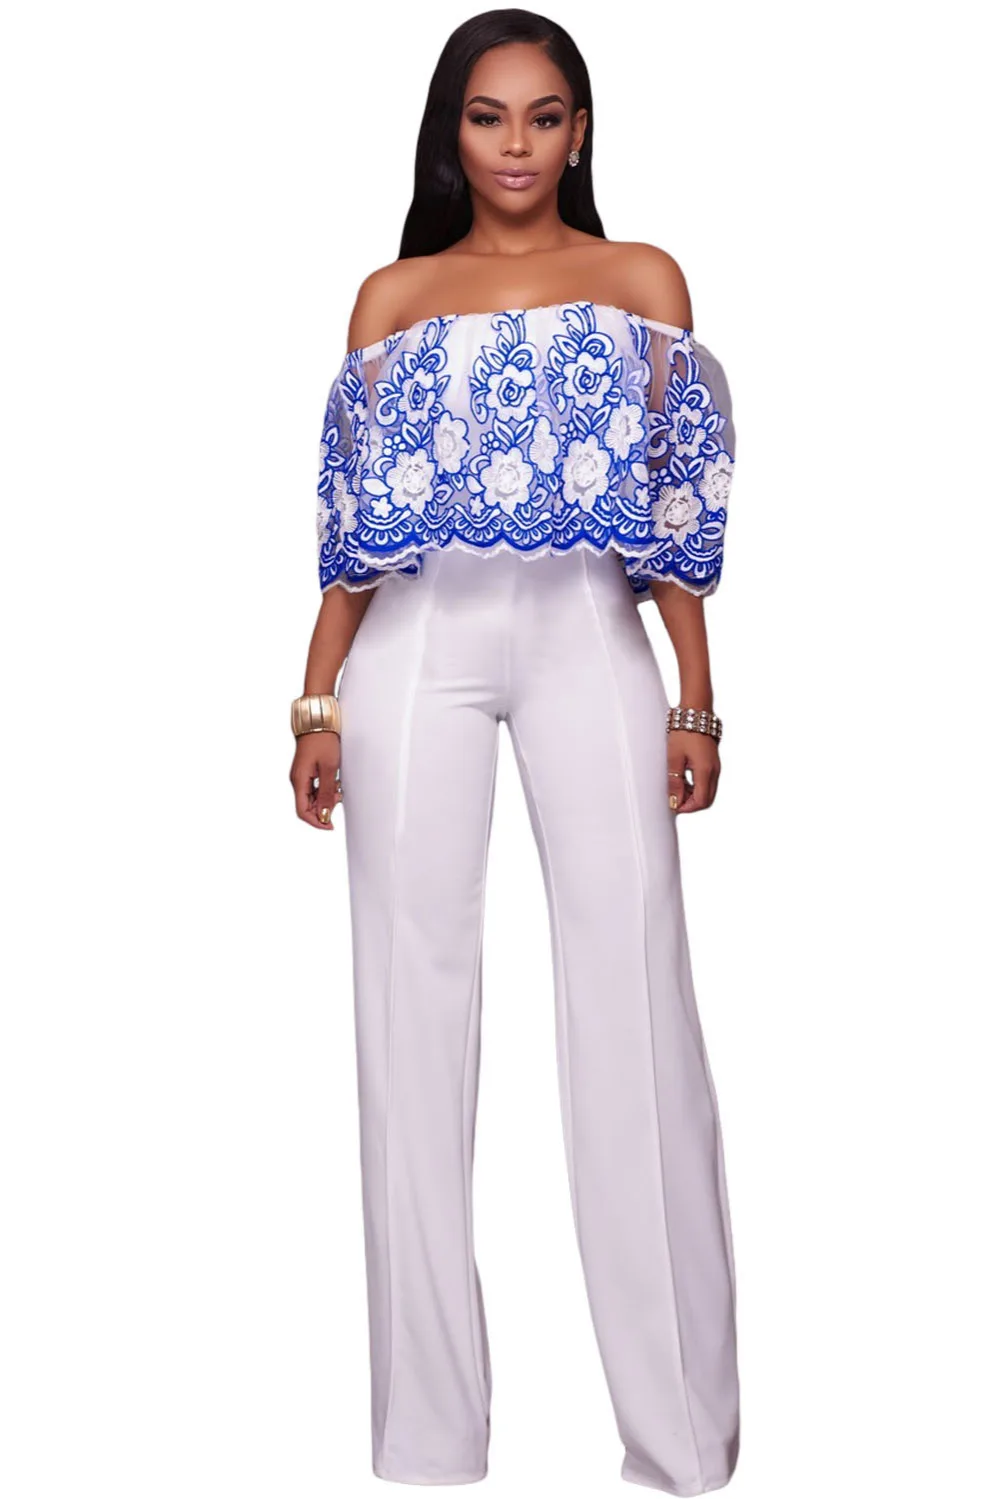 Blue-Embroidery-Ruffle-Overlay-Strapless-Jumpsuit-LC64266-5-1